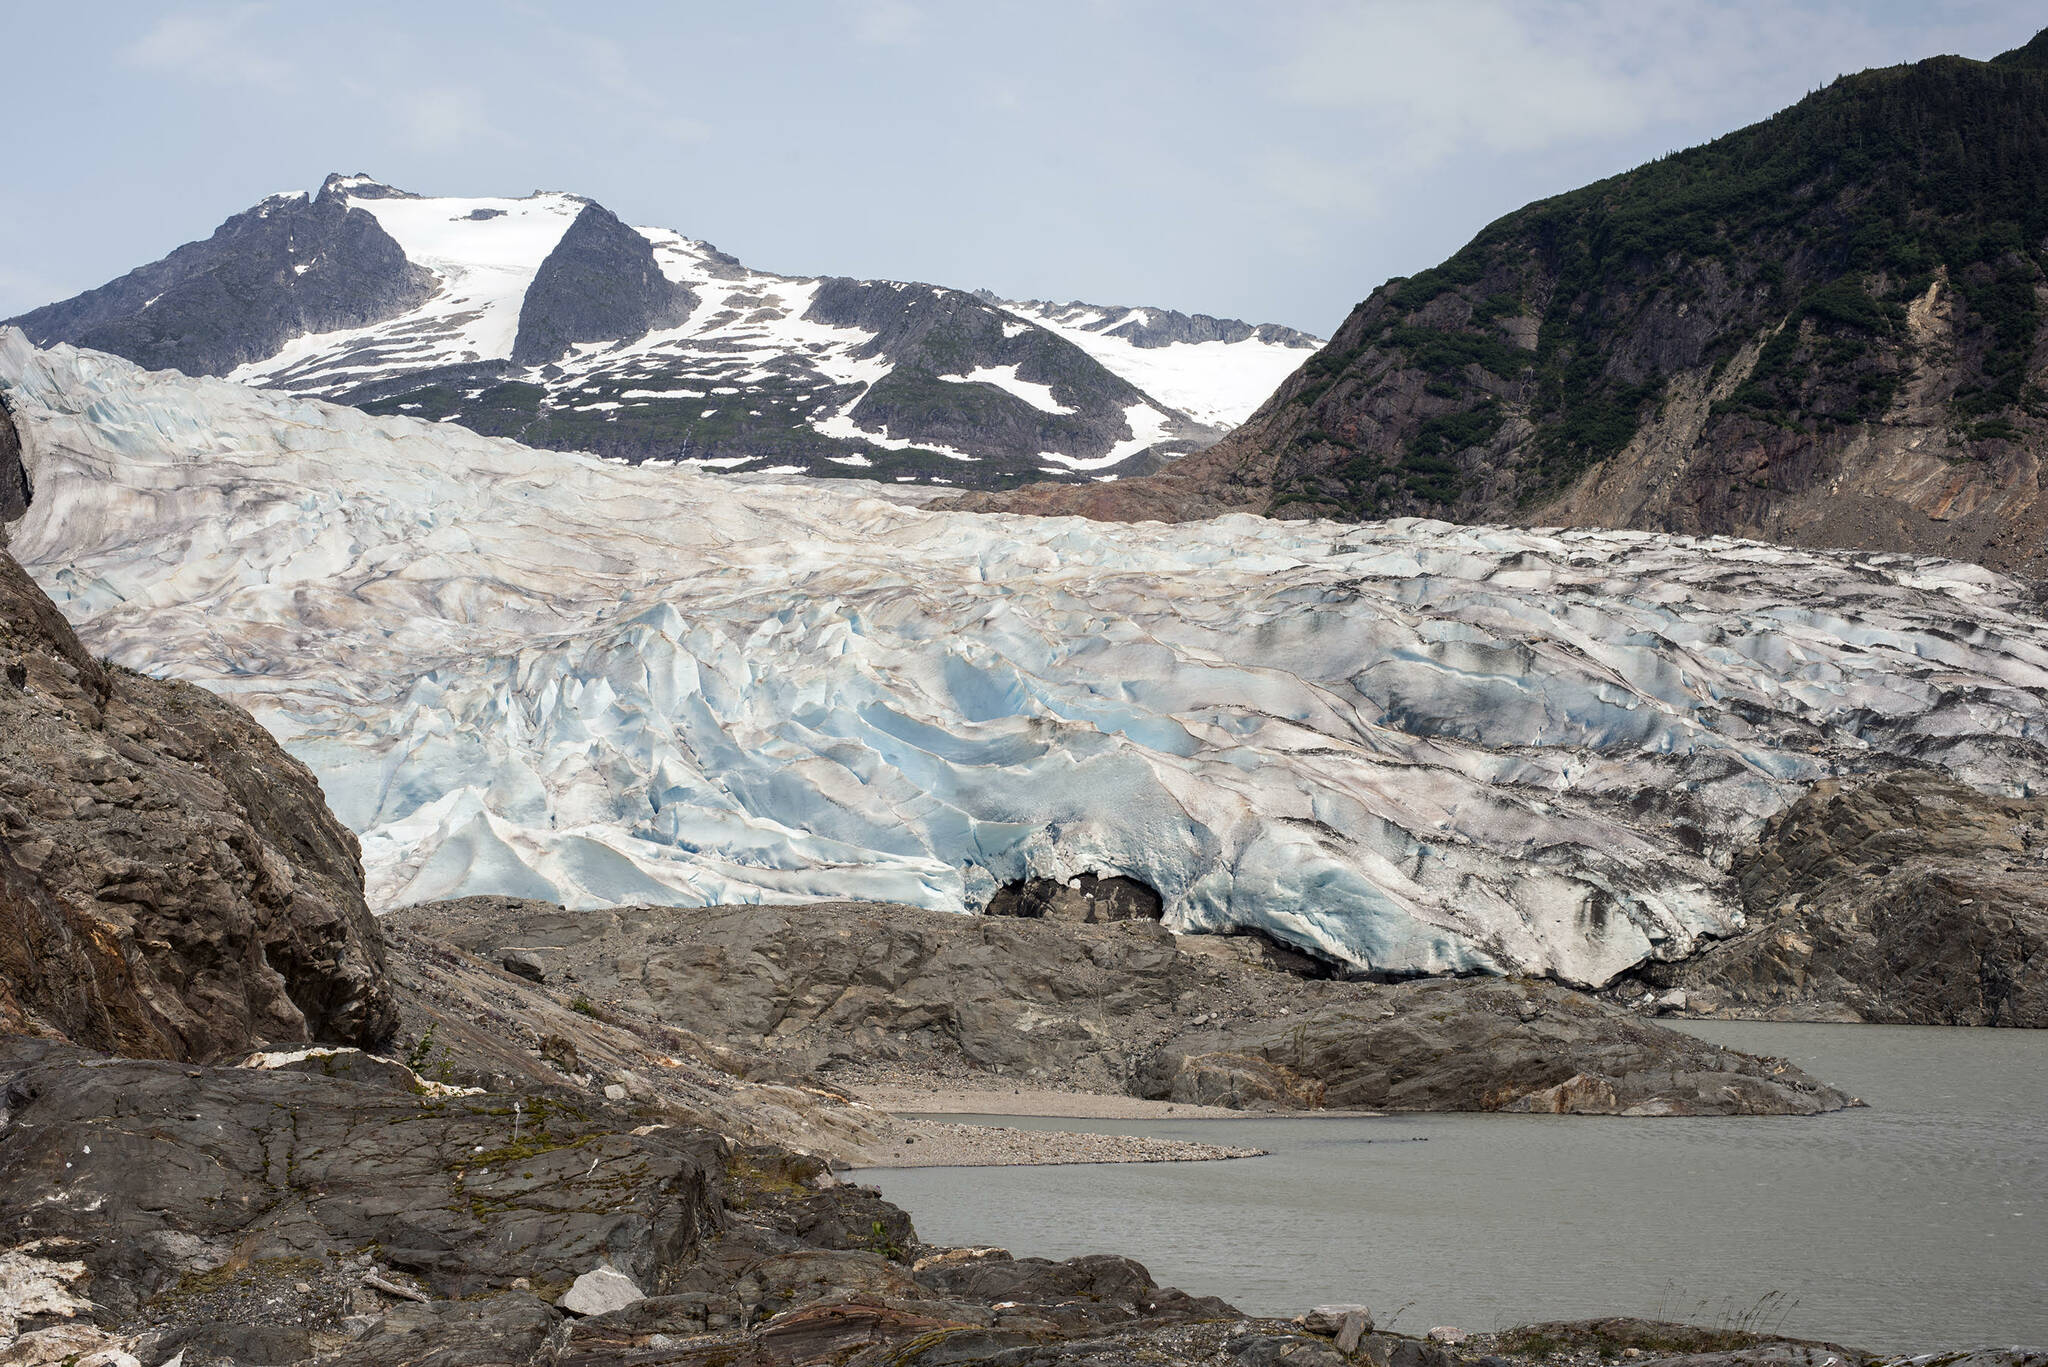 The Mendenhall Glacier as seen from a rocky shore reached by an inflatable boat July 14. (Courtesy Photo / Kenneth Gill, gillfoto)